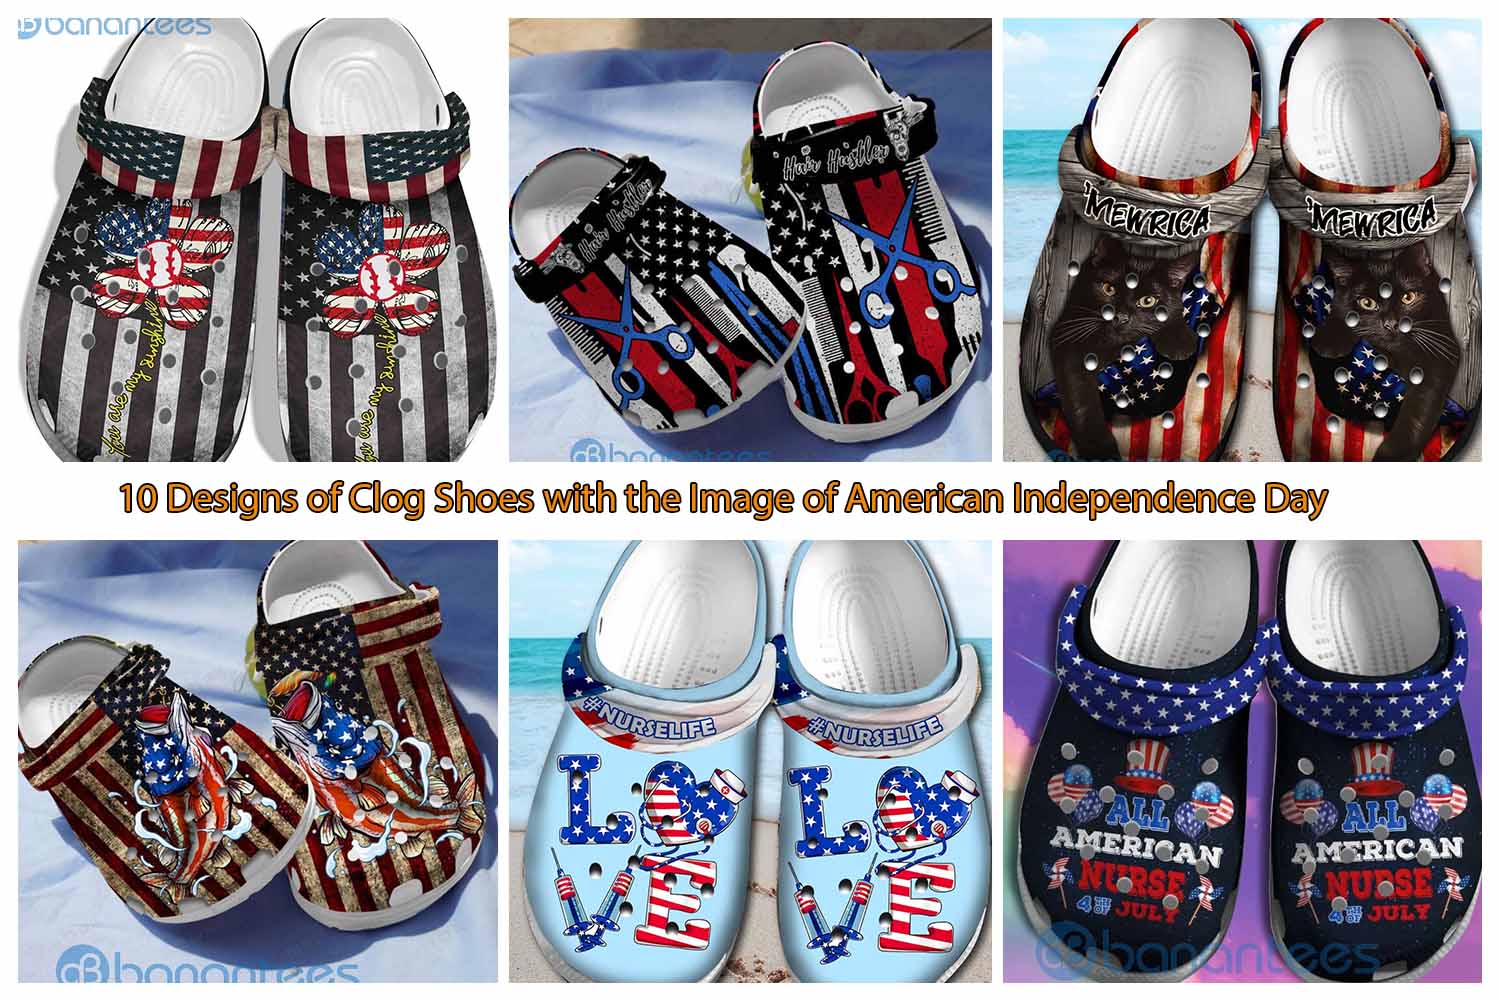 10 Designs of Clog Shoes with the Image of American Independence Day